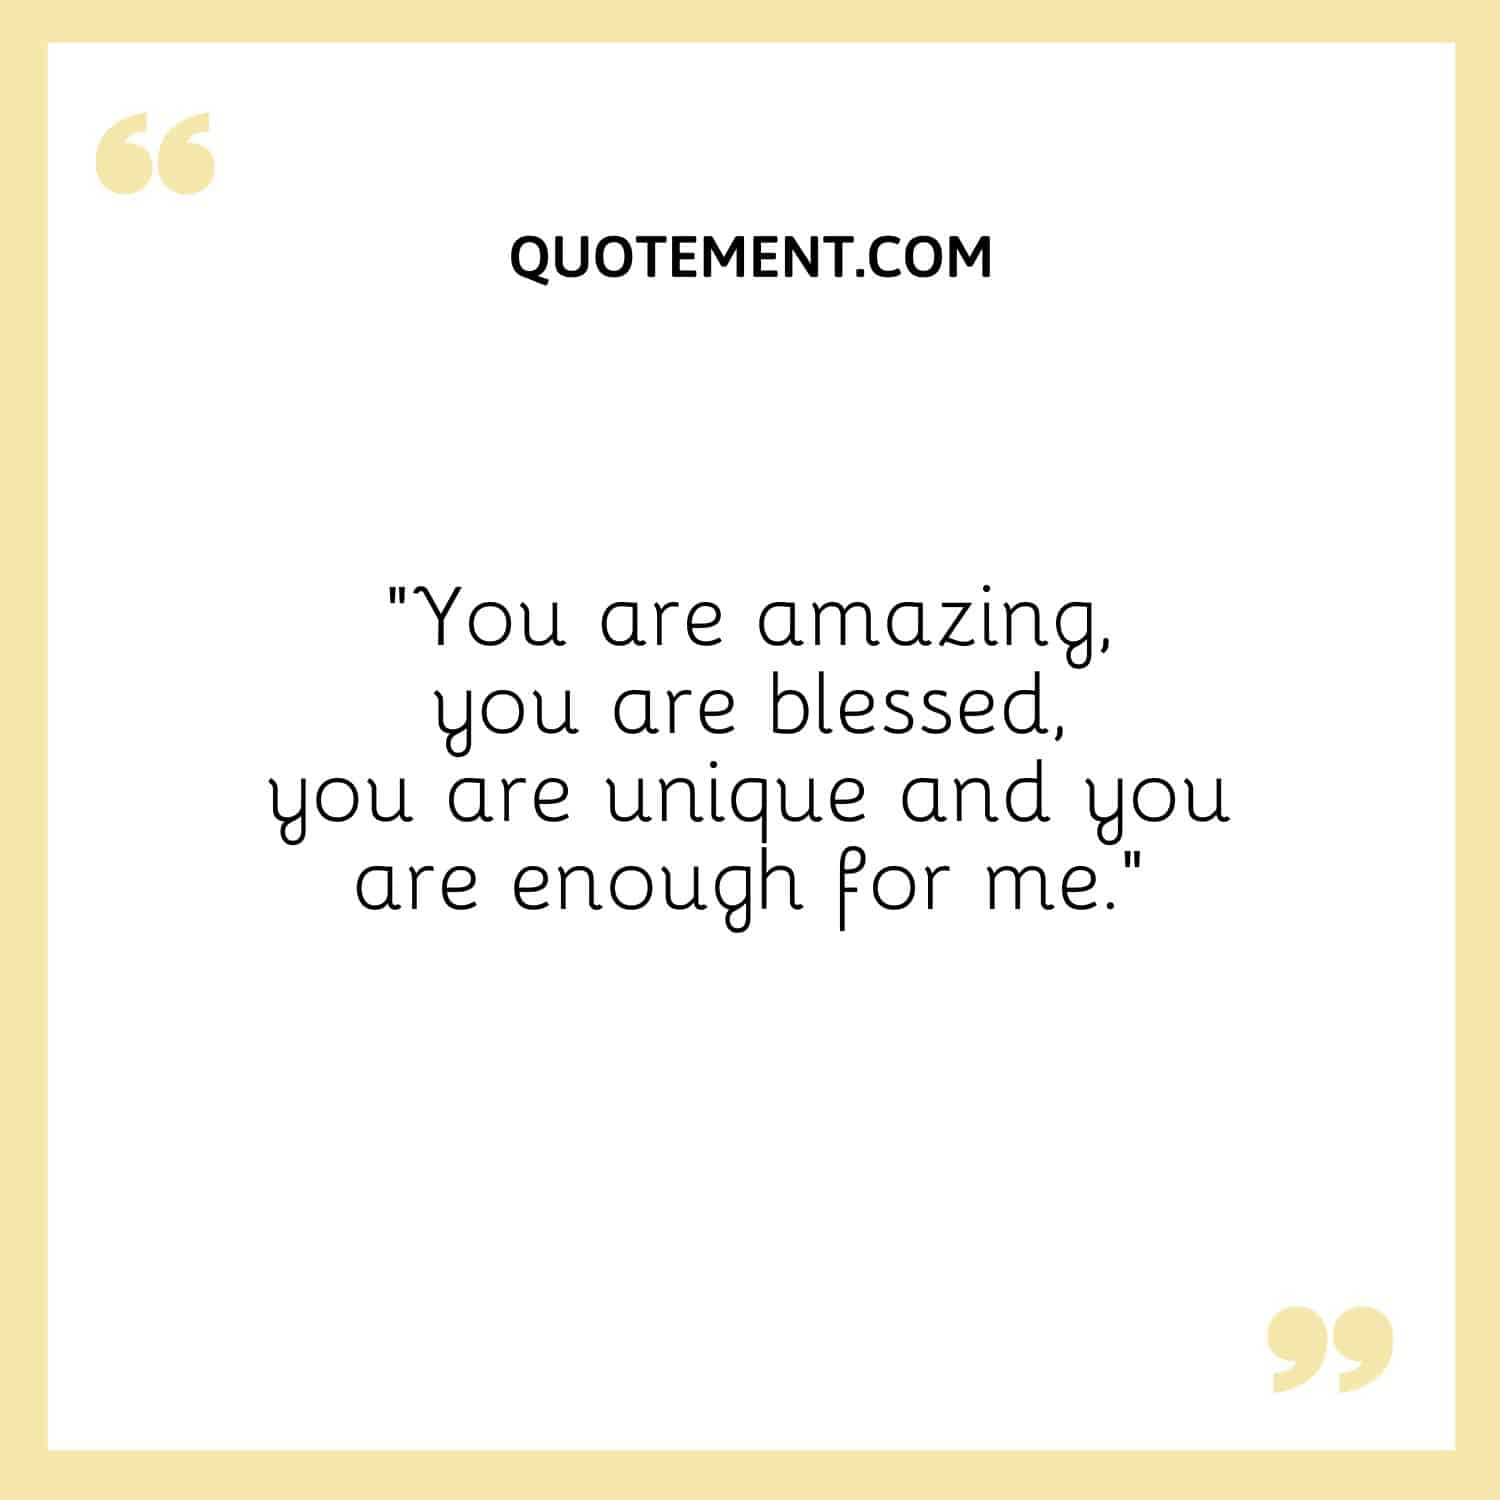 You are amazing, you are blessed, you are unique and you are enough for me